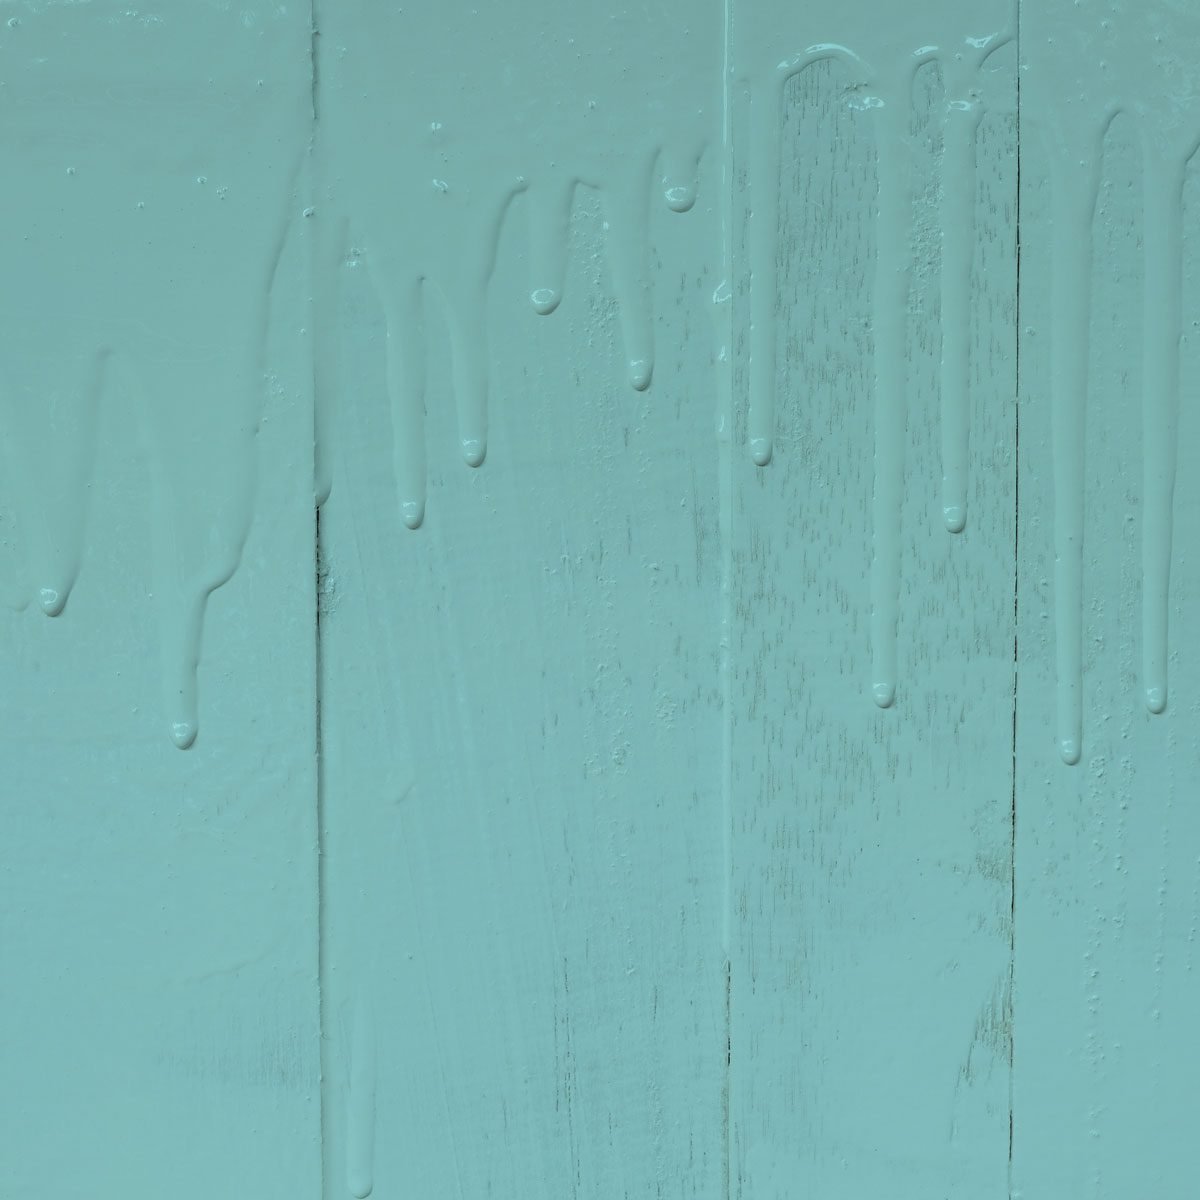 Dripping blue paint on highly textured wall